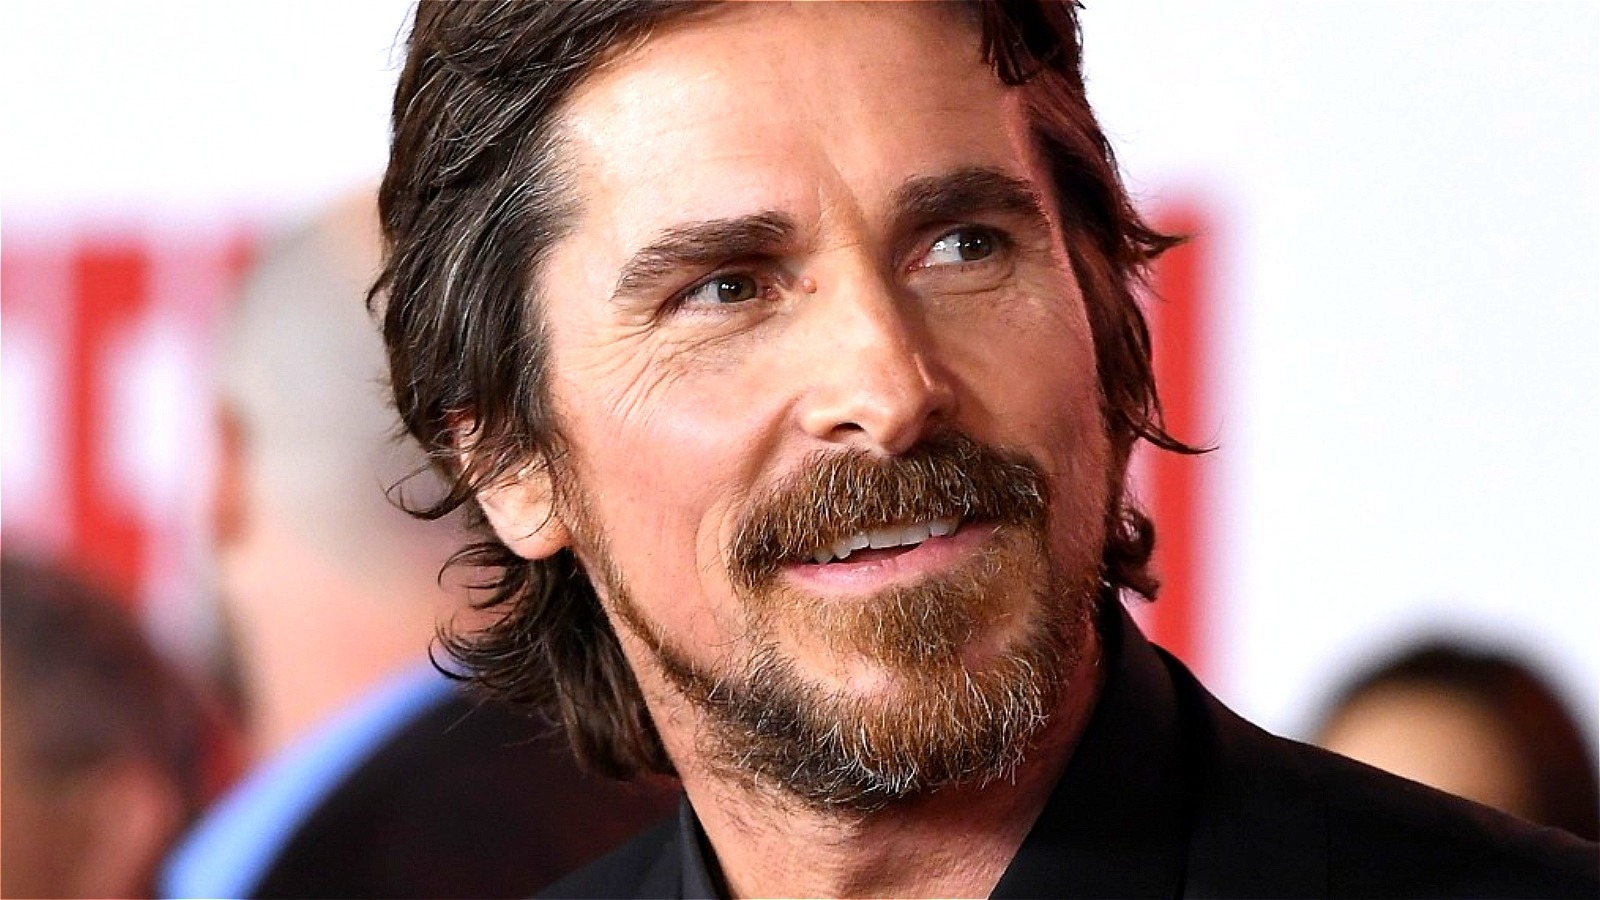 Christian Bale at an event.